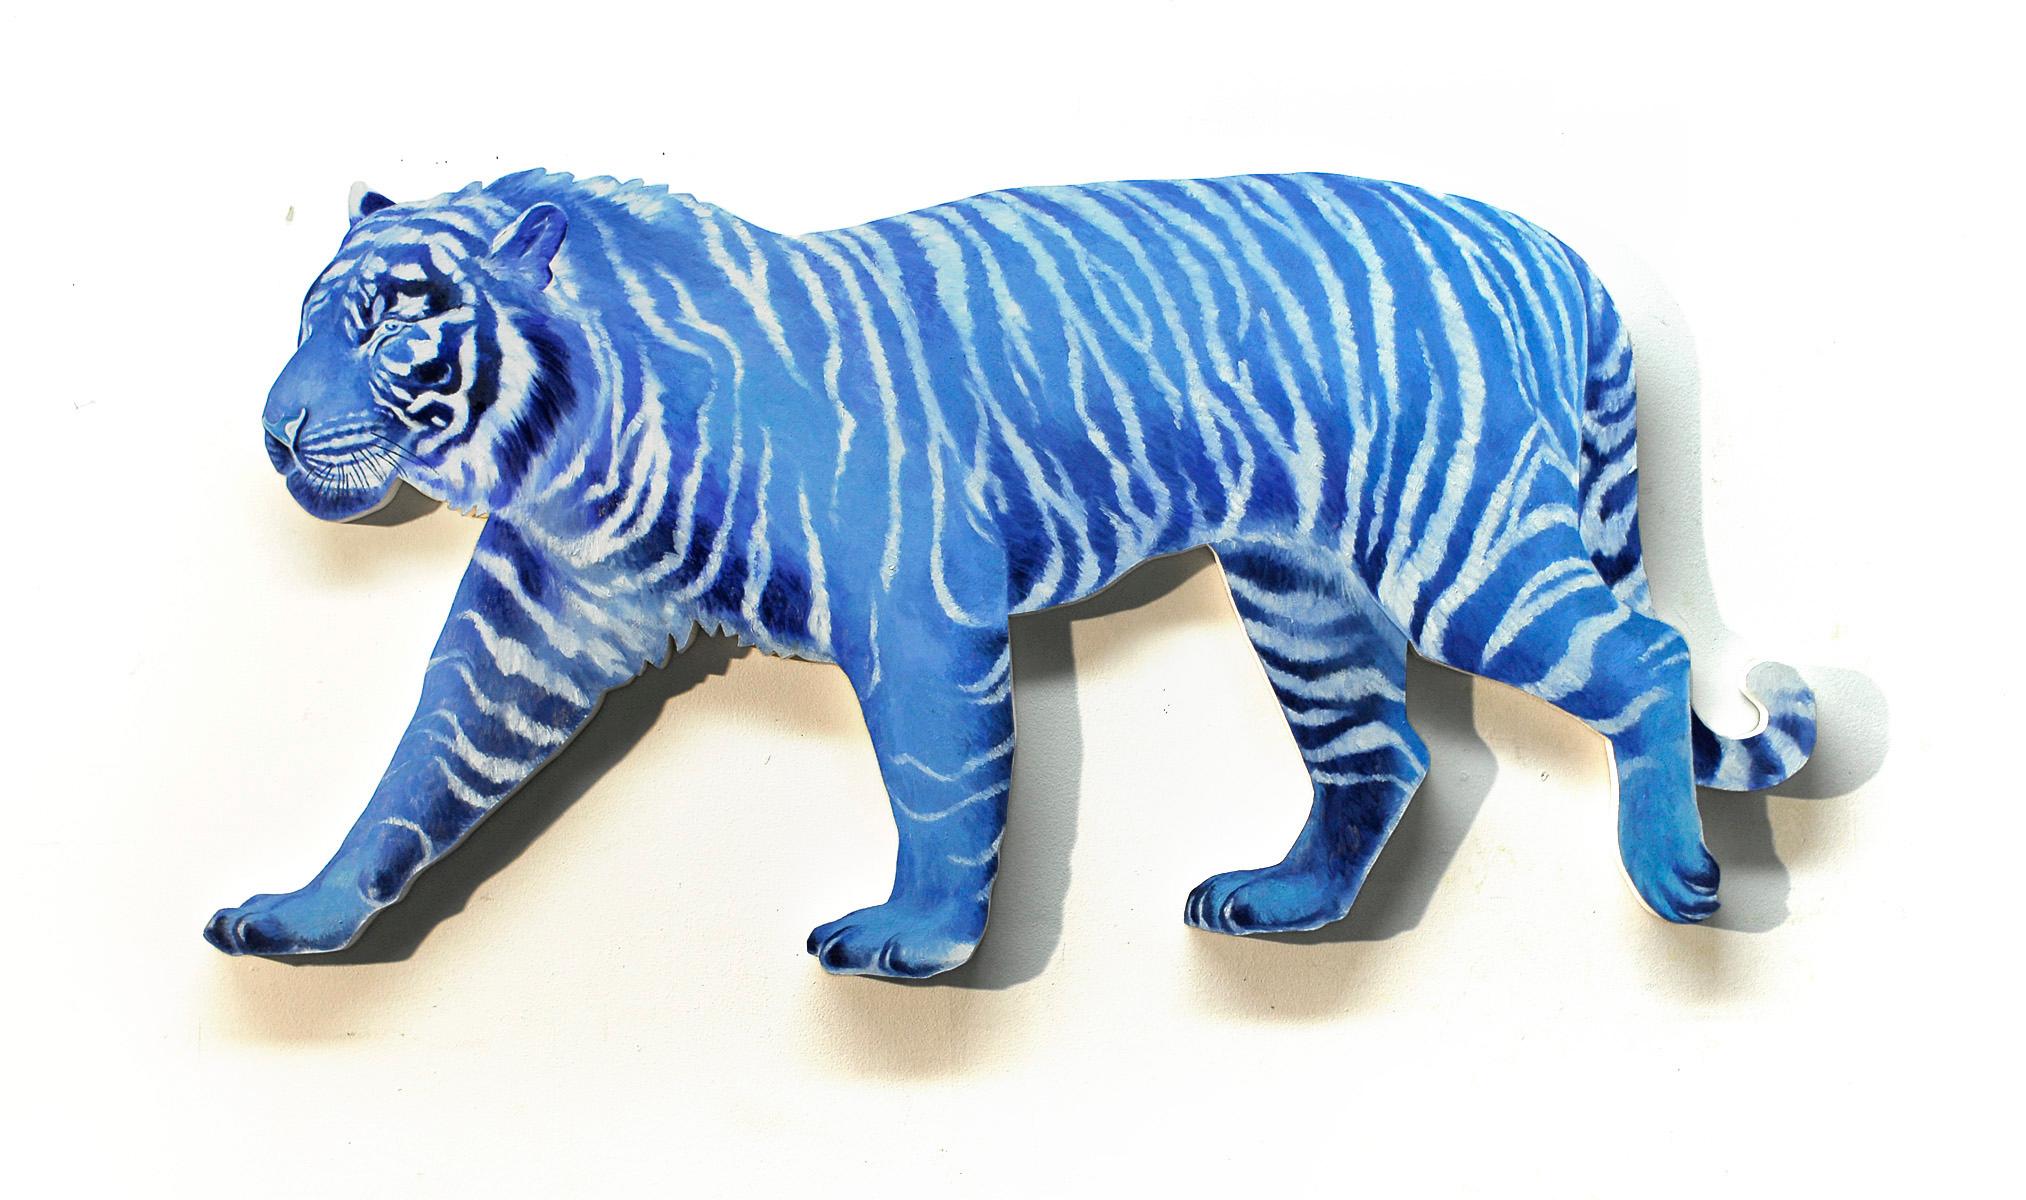 Bengal Tiger, oil on cut out wood panel, blue & white striped figurative, animal - Contemporary Painting by Alexis Kandra